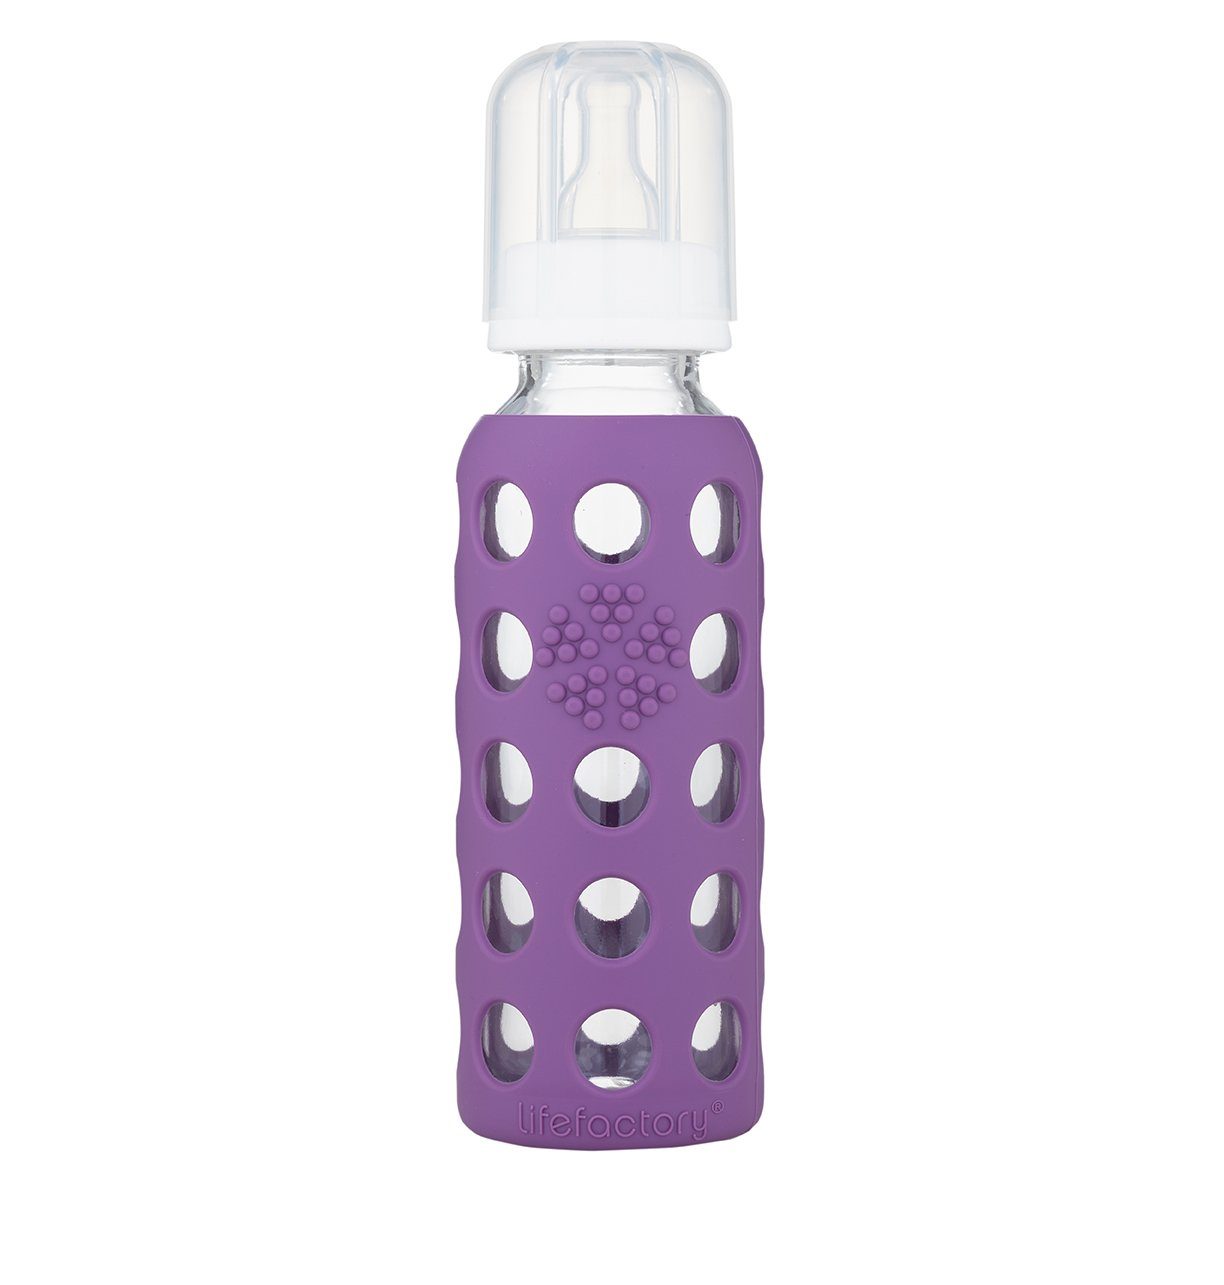 Lifefactory Babyflasche, Baby Glasflasche 250ml, inkl. Silikonsauger Gr. 2 (3-6 Monate) grape